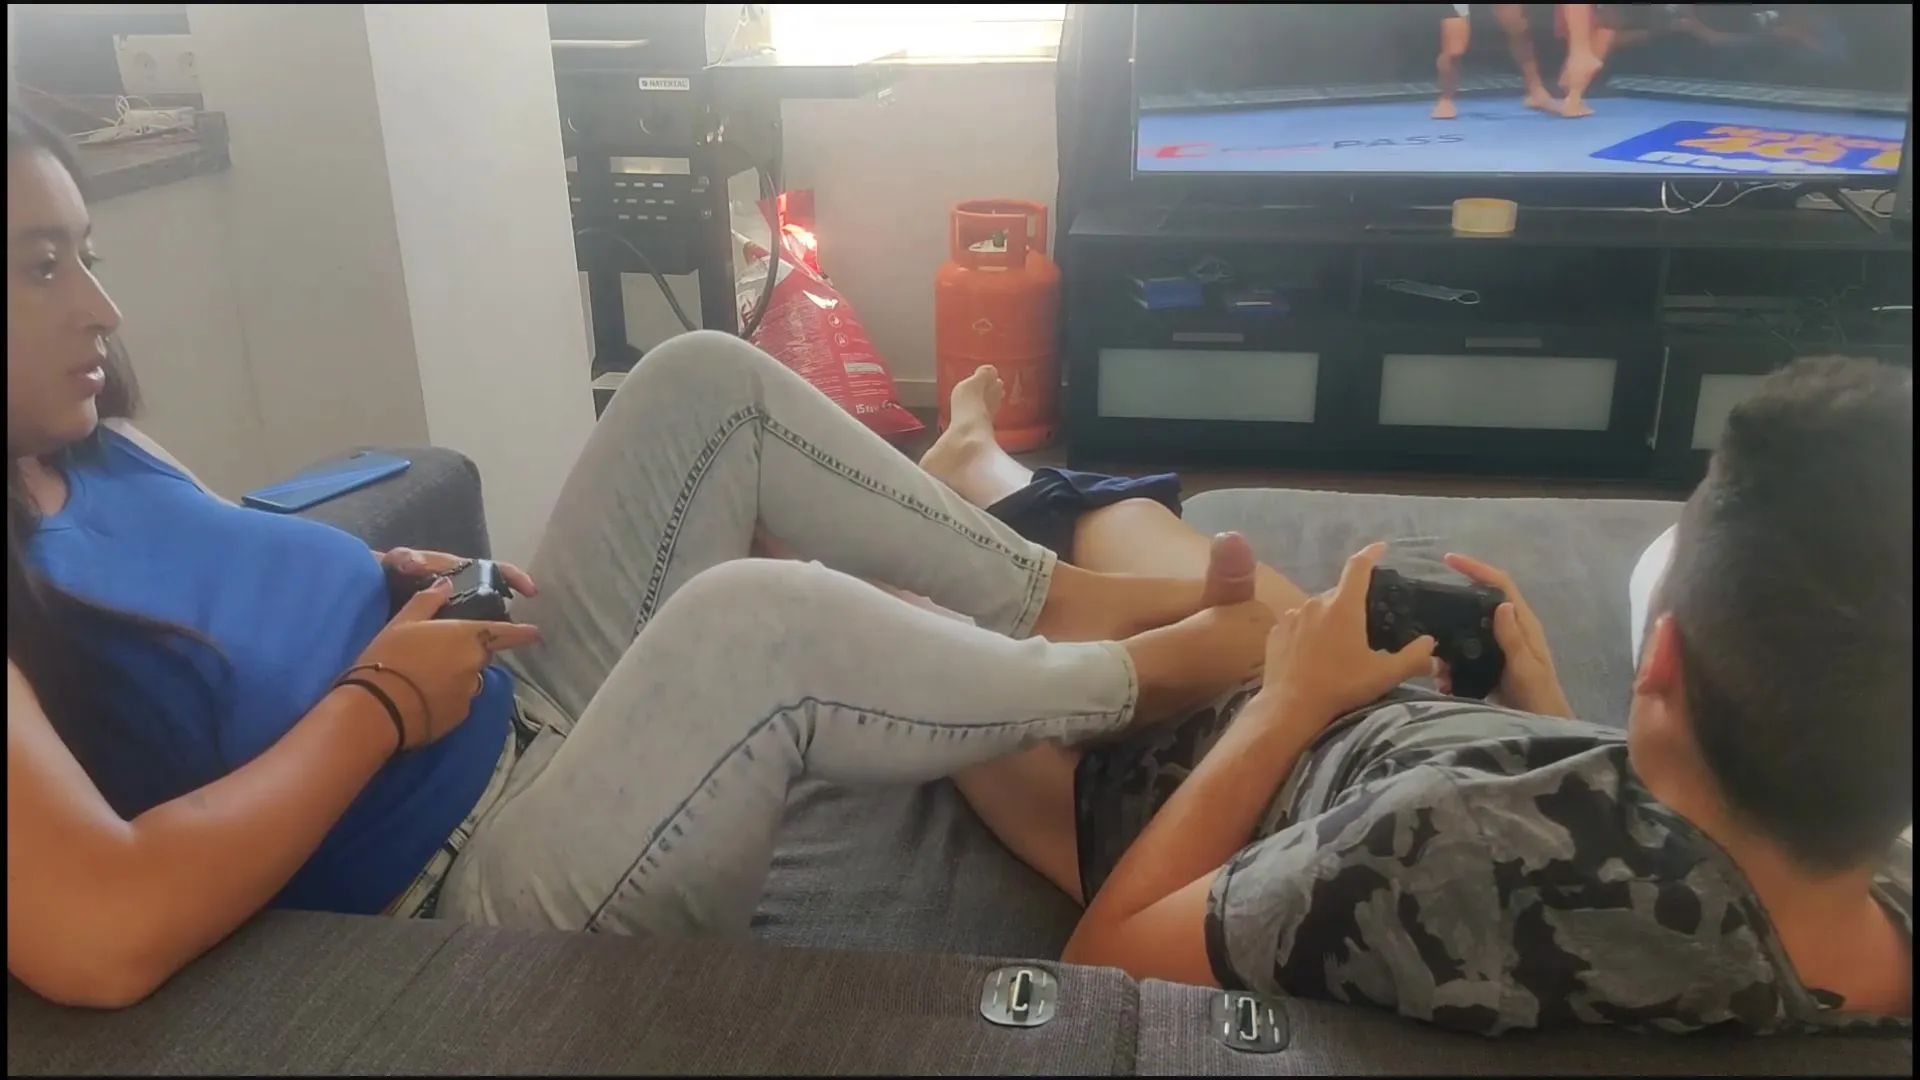 Friends GF Gives Footjob as We Play pic